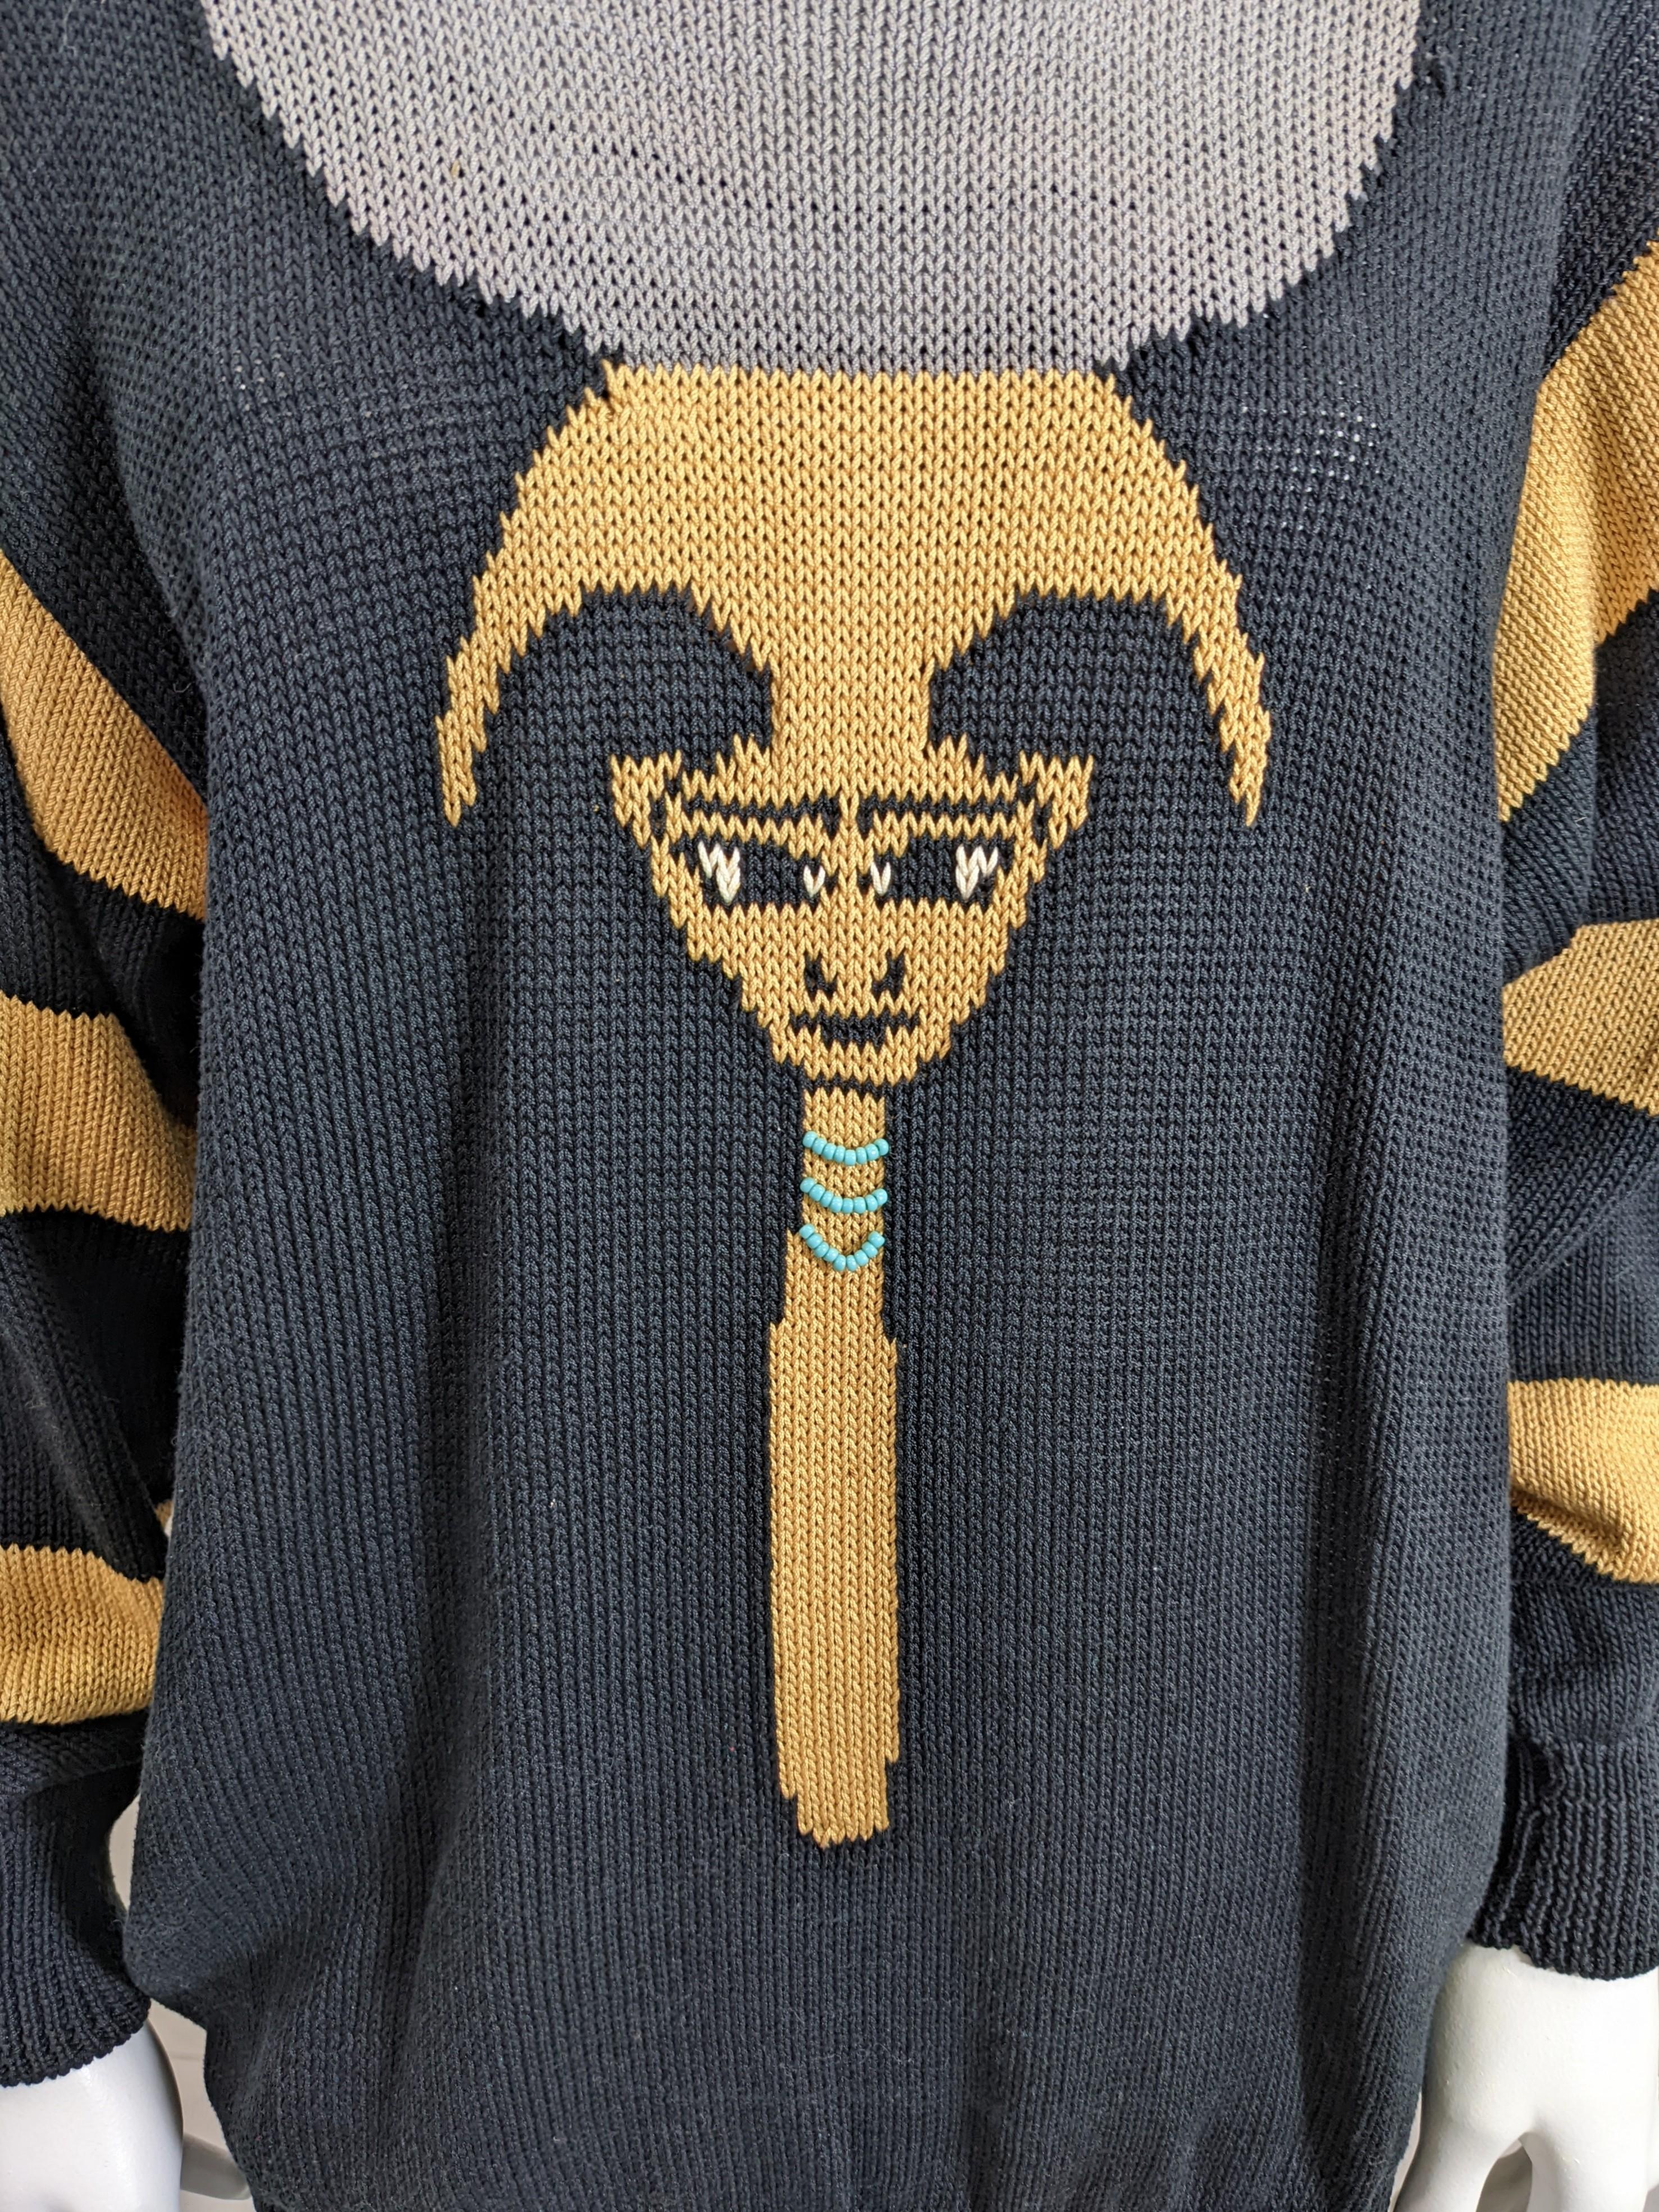 Women's or Men's Handknit Eygptian Themed Sweater, Dia North of Boston For Sale